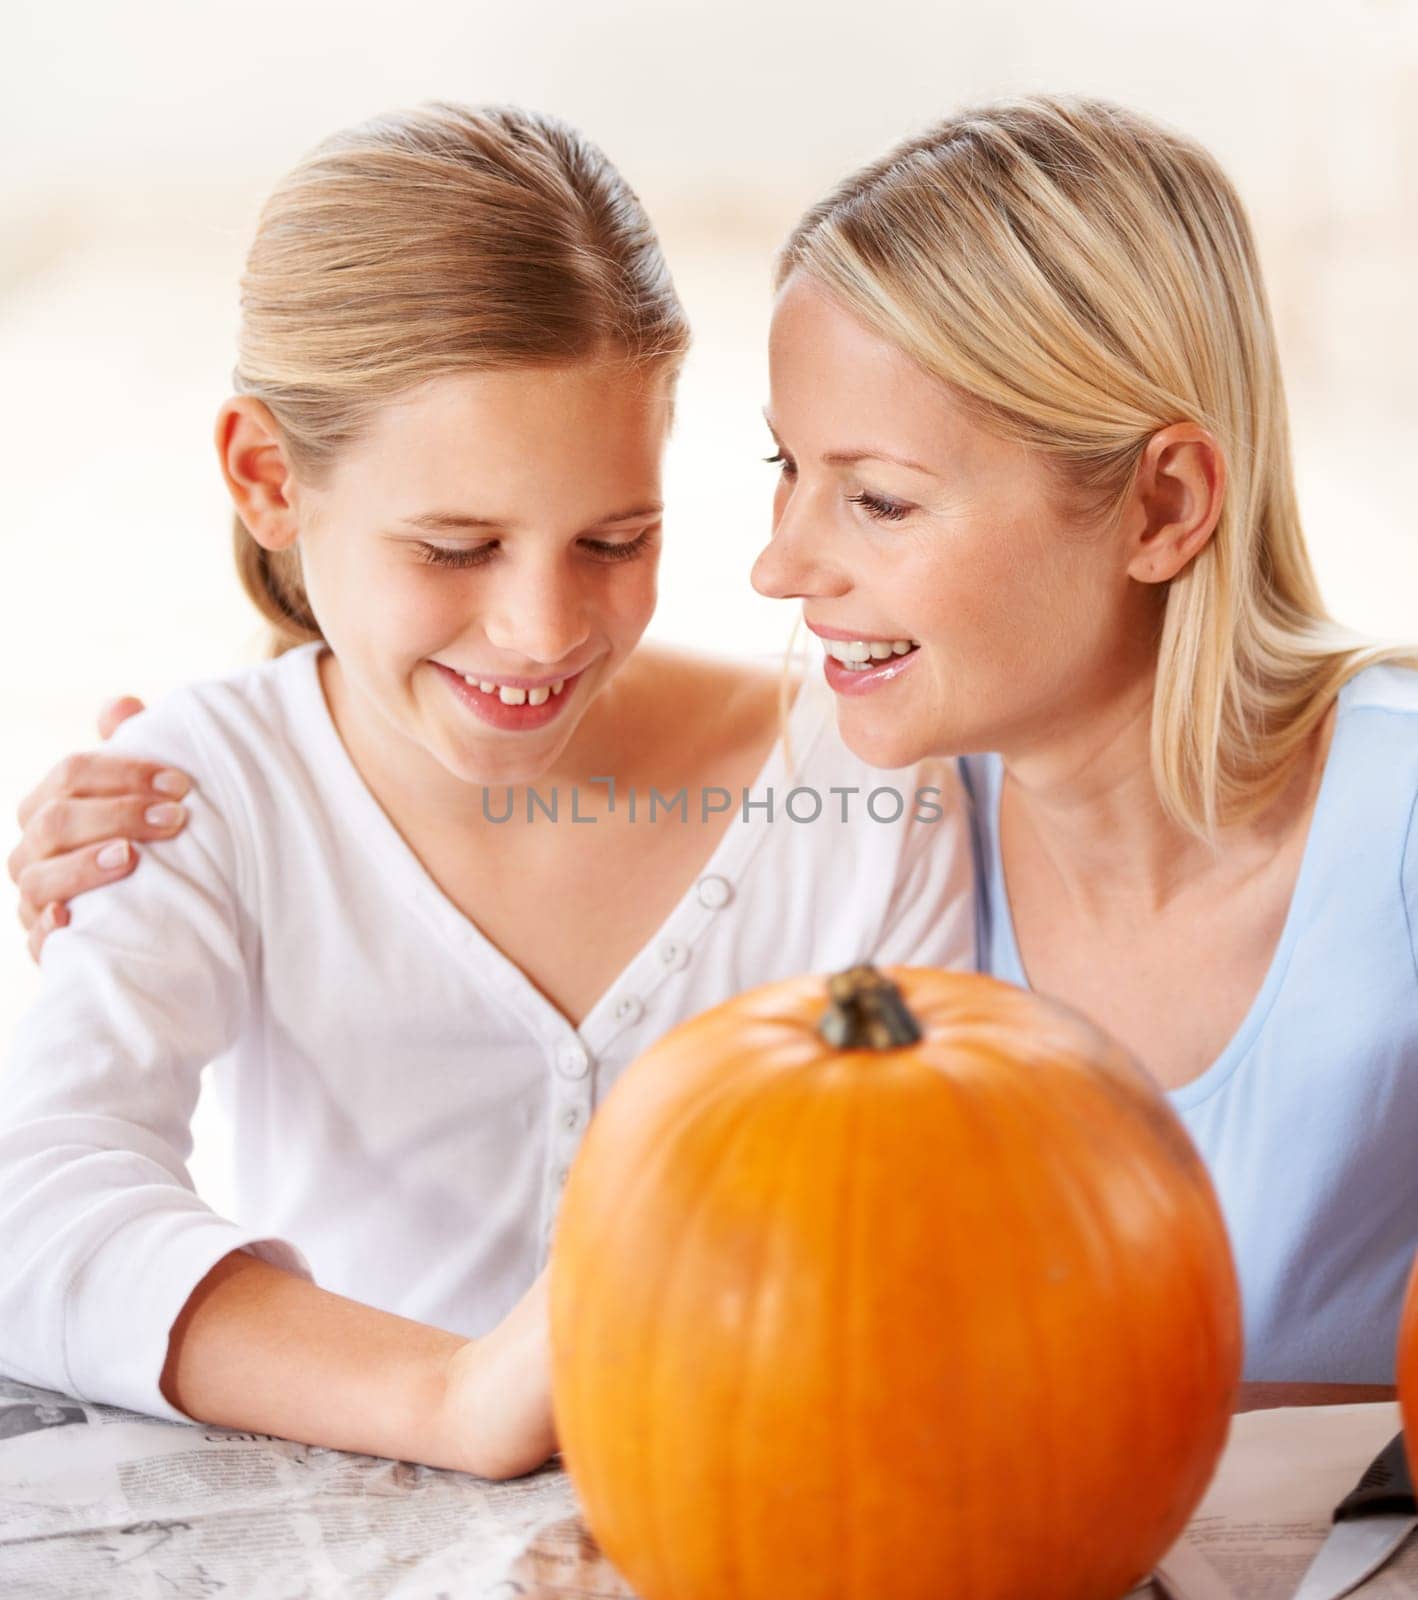 Happy, mother and child with pumpkin to celebrate halloween, party and fun together at home. Young girl, mom and family carving orange vegetable for holiday lantern, decoration or creativity of craft by YuriArcurs